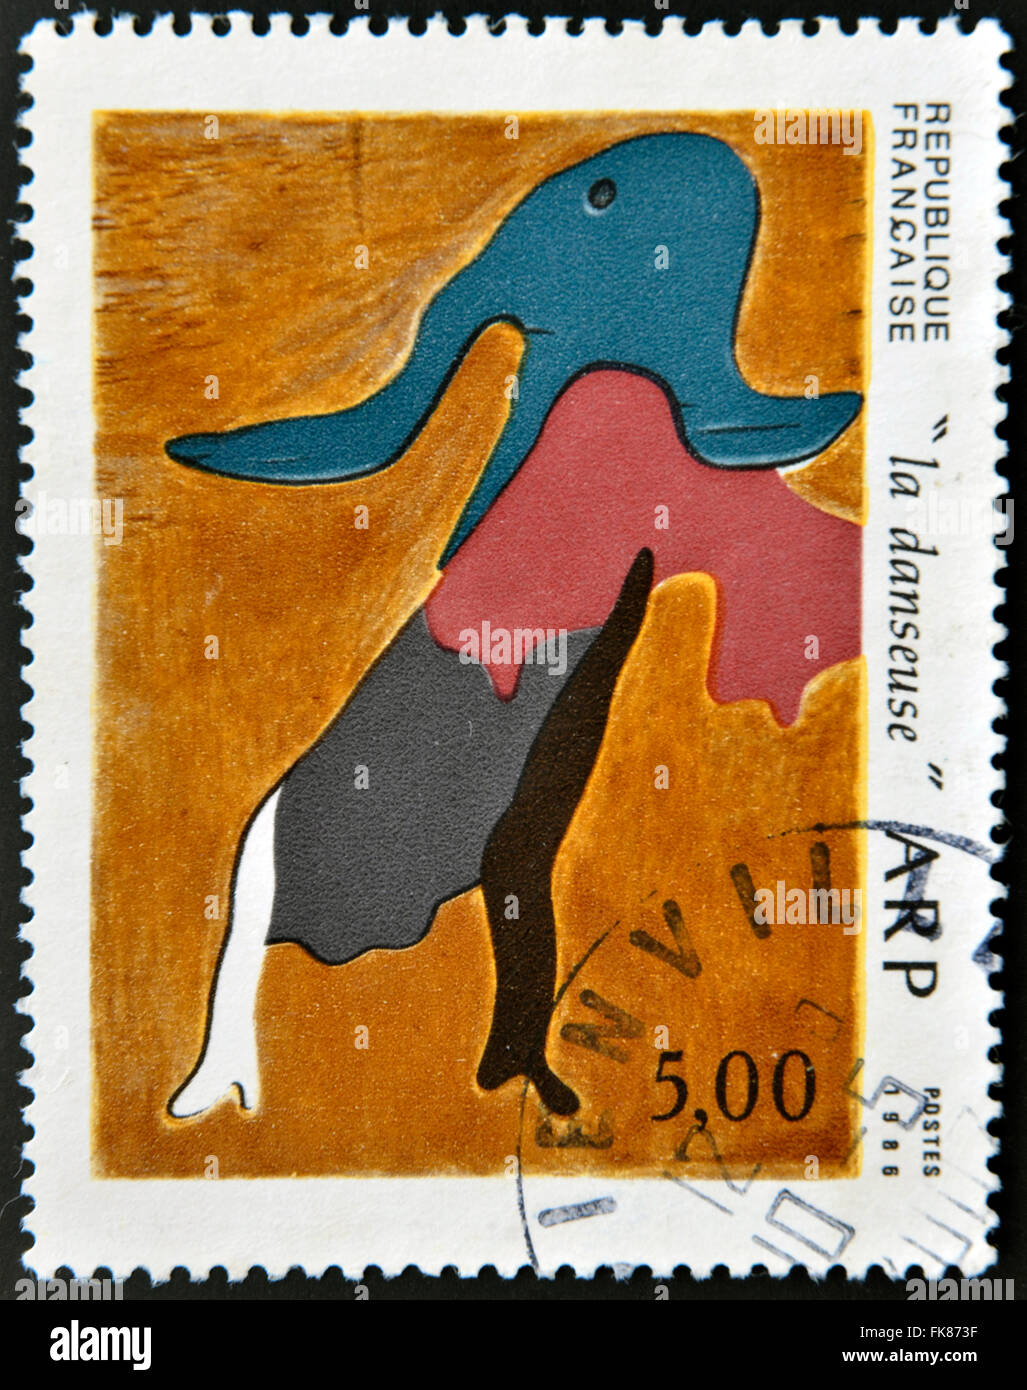 FRANCE - CIRCA 1986: A stamp printed in France shows the dancer by Jean Arp, circa 1986 Stock Photo